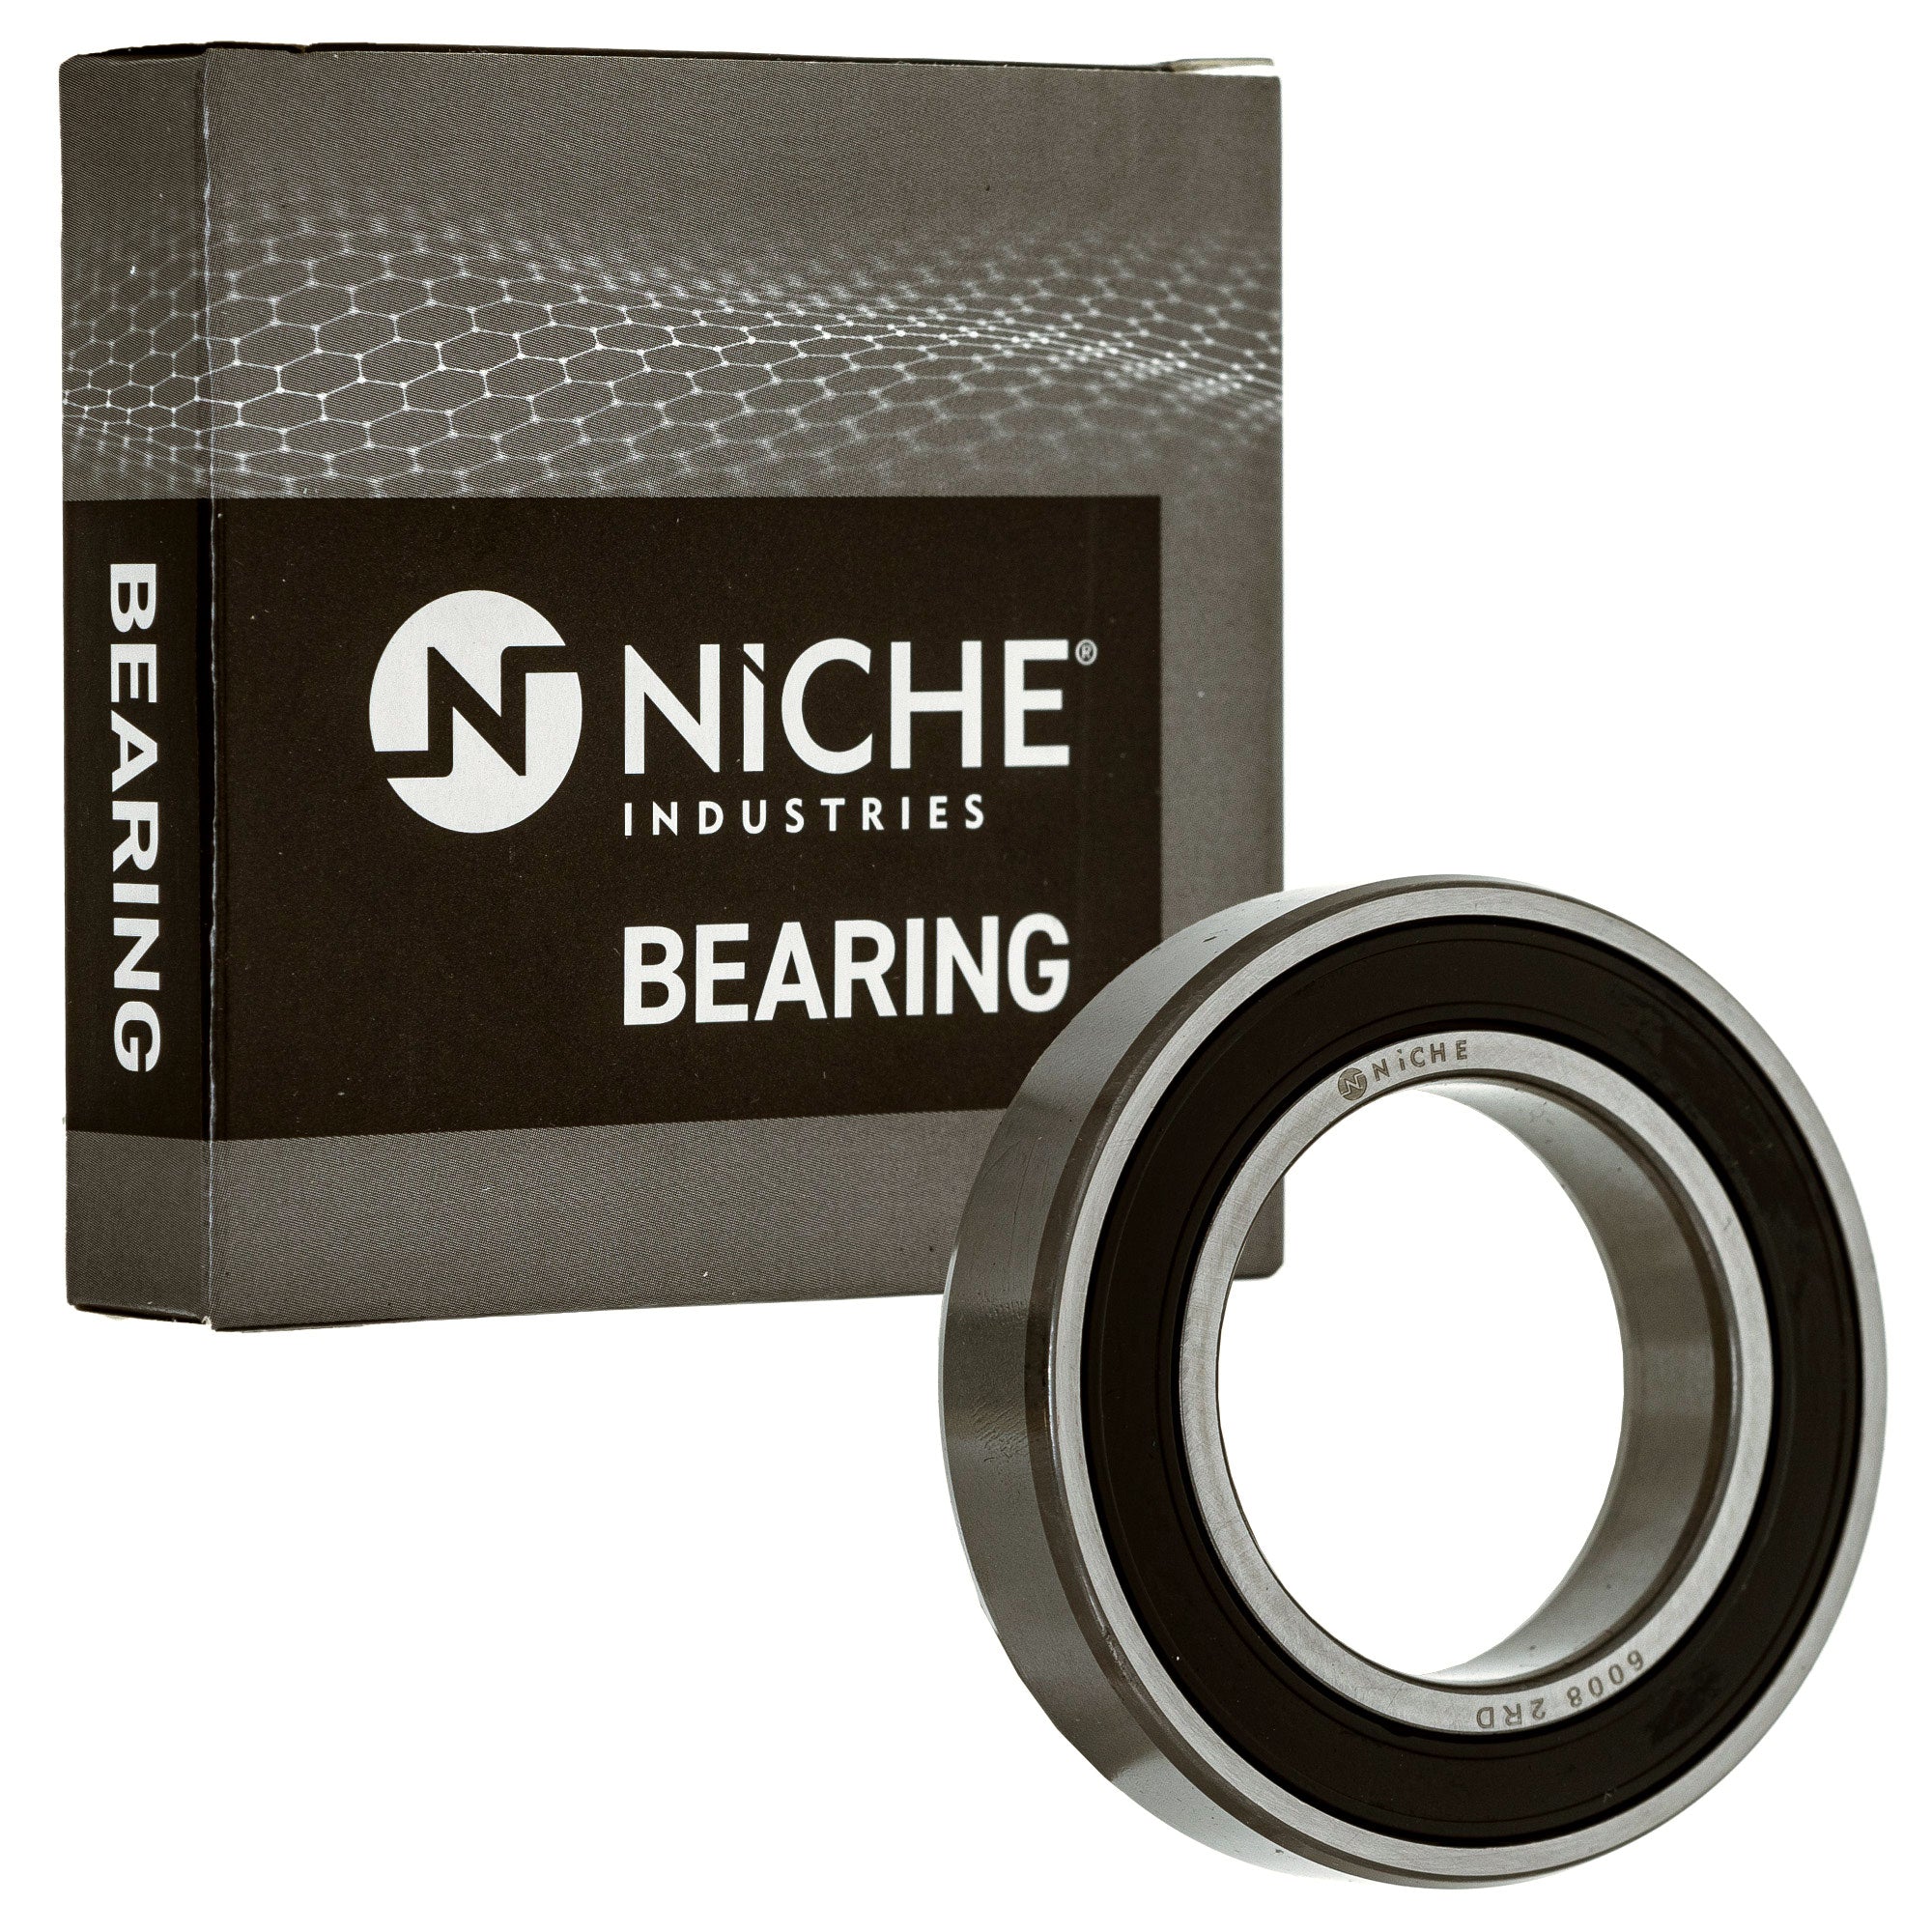 NICHE 519-CBB2209R Bearing 2-Pack for zOTHER Arctic Cat Textron